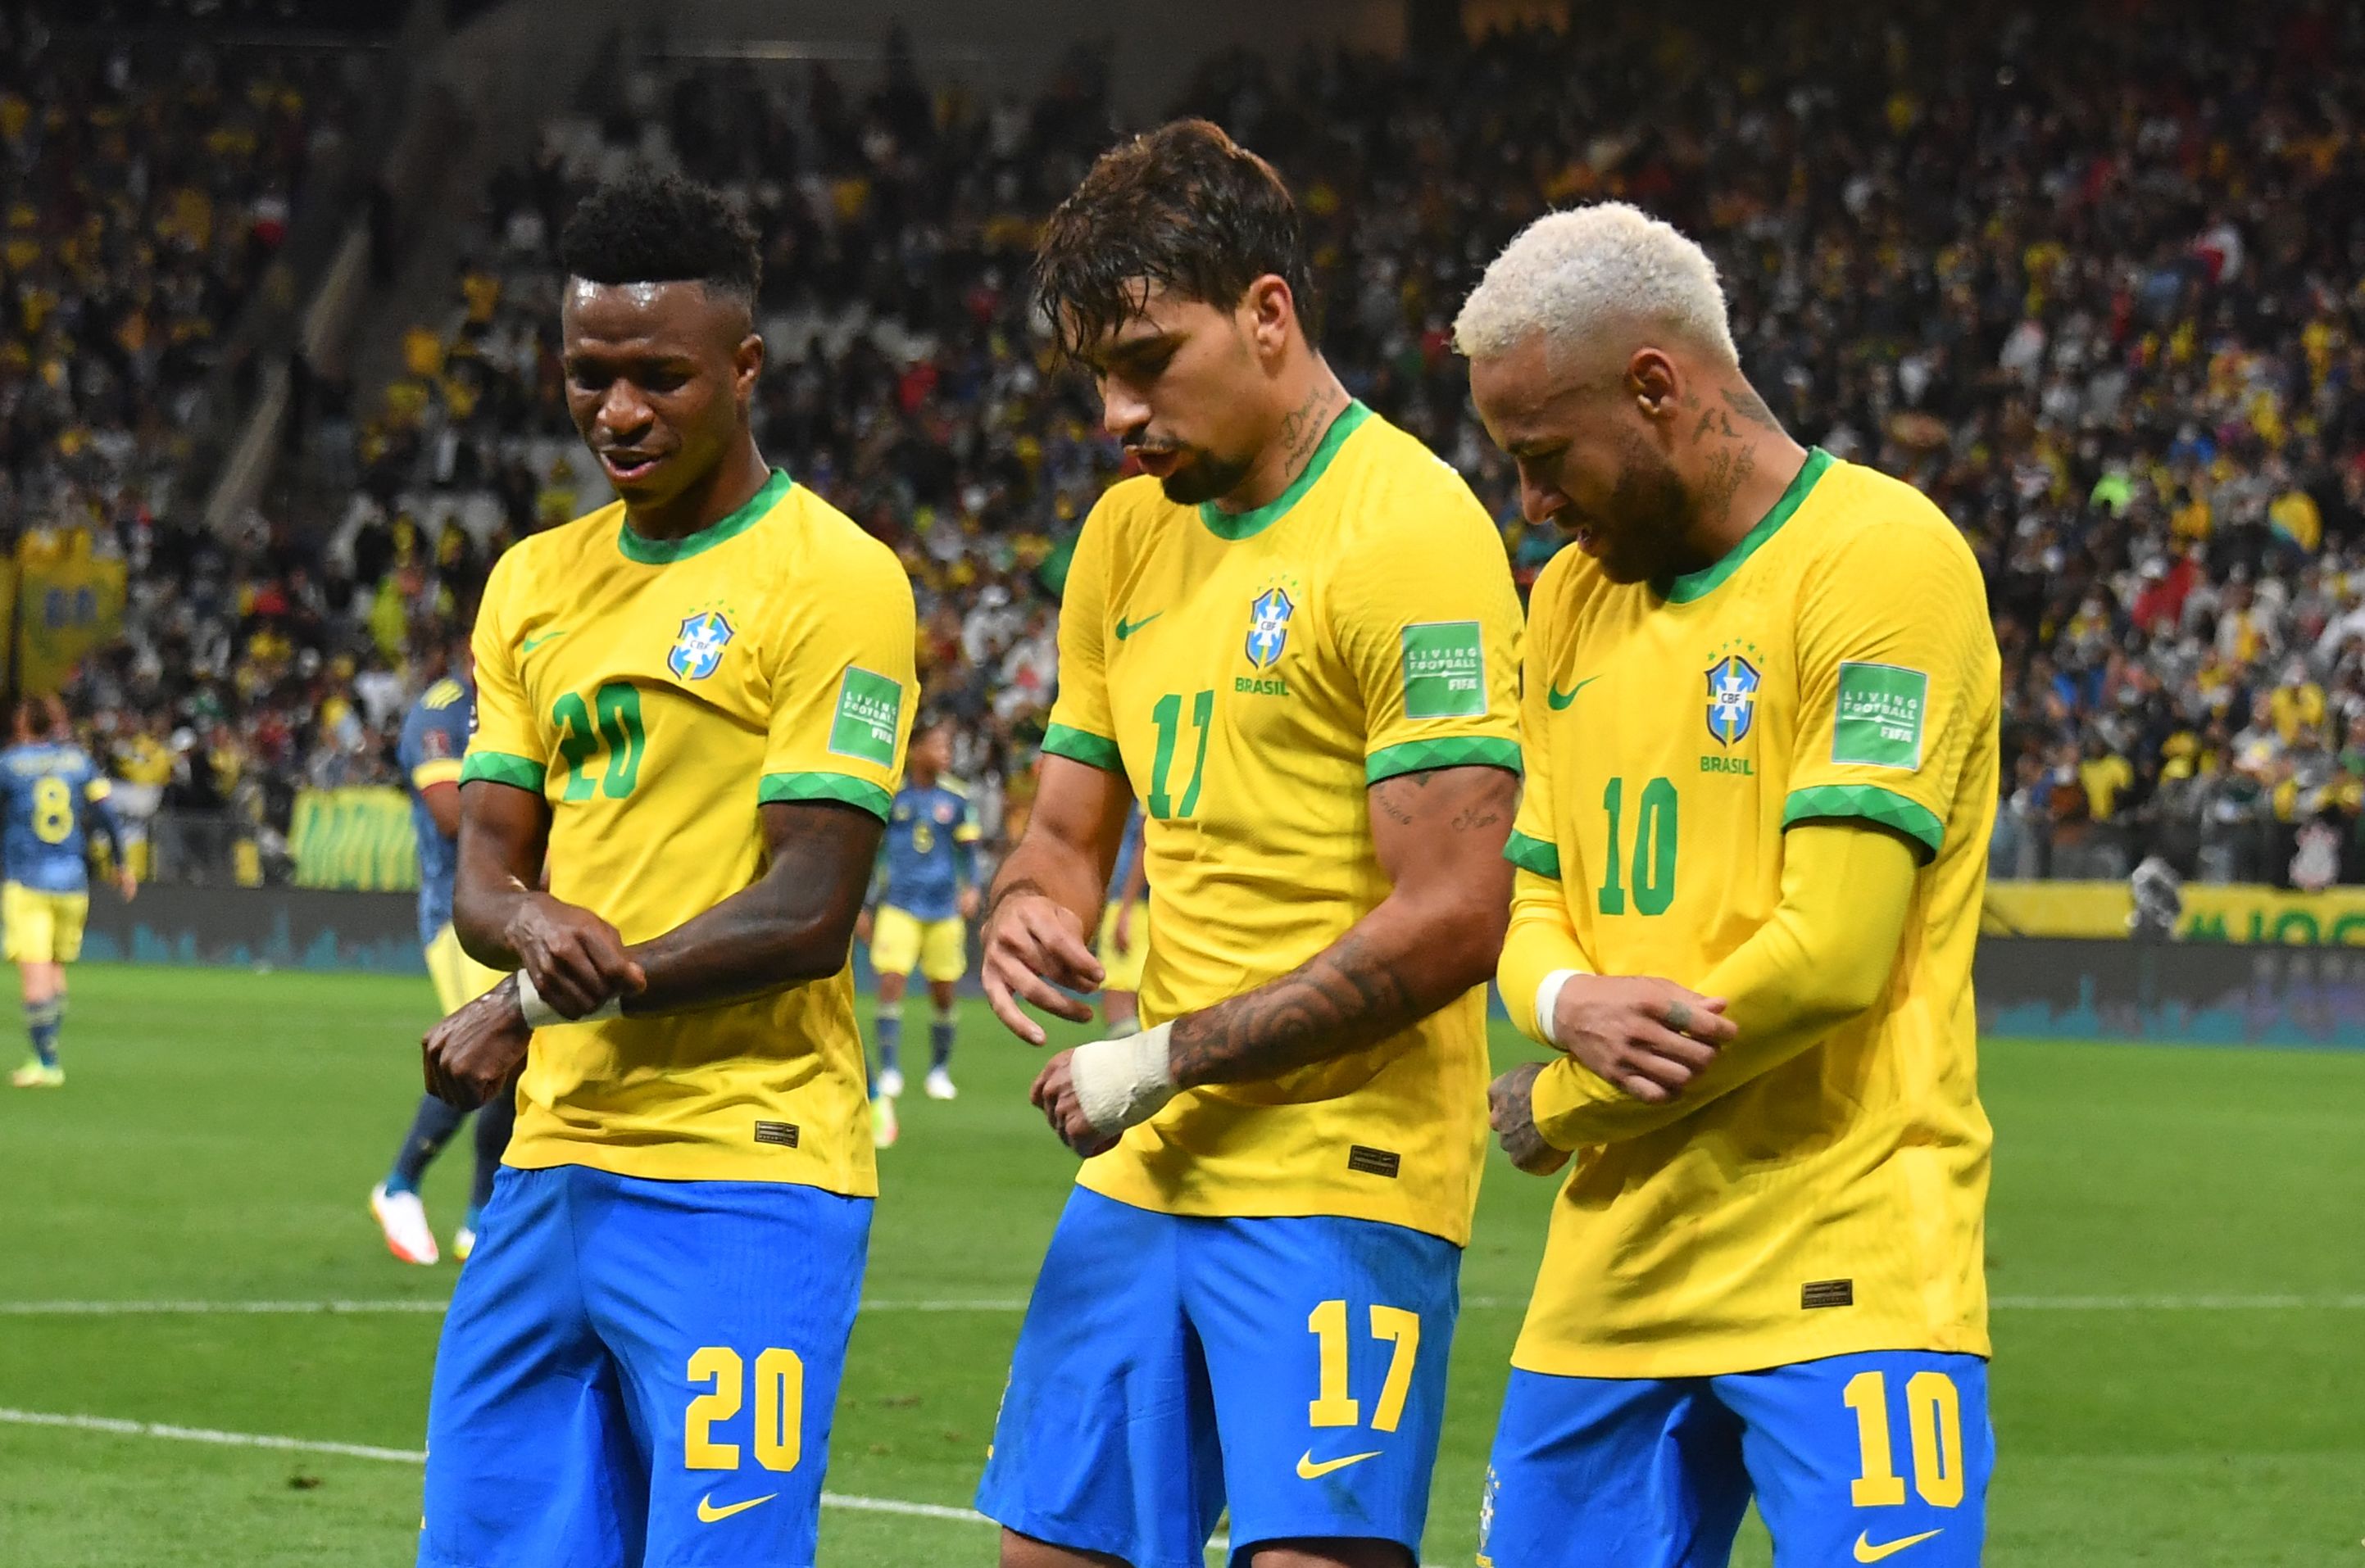 2022 FIFA World Cup: Brazil's projected starting lineup with